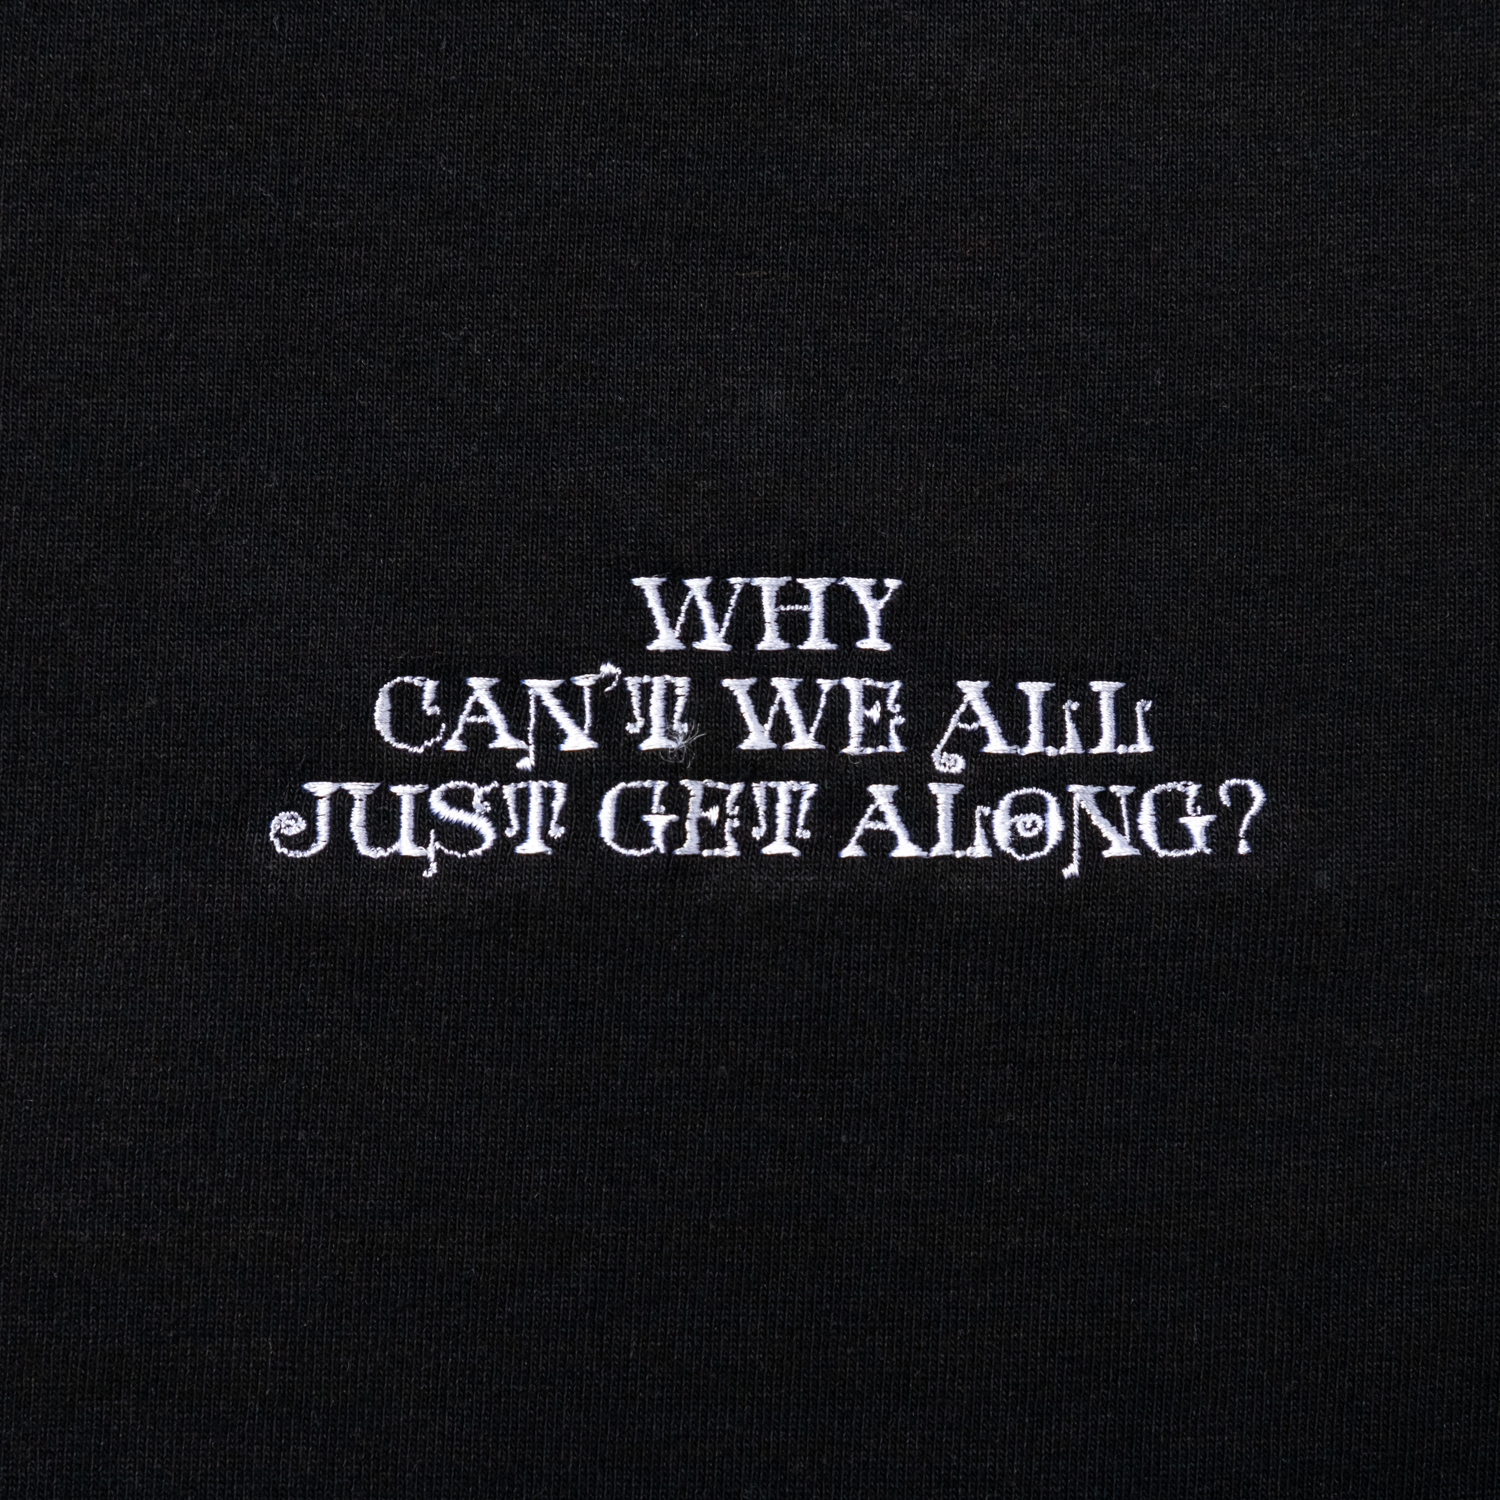 WHY CAN’T WE ALL JUST GET ALONG? designed by Jerry UKAI